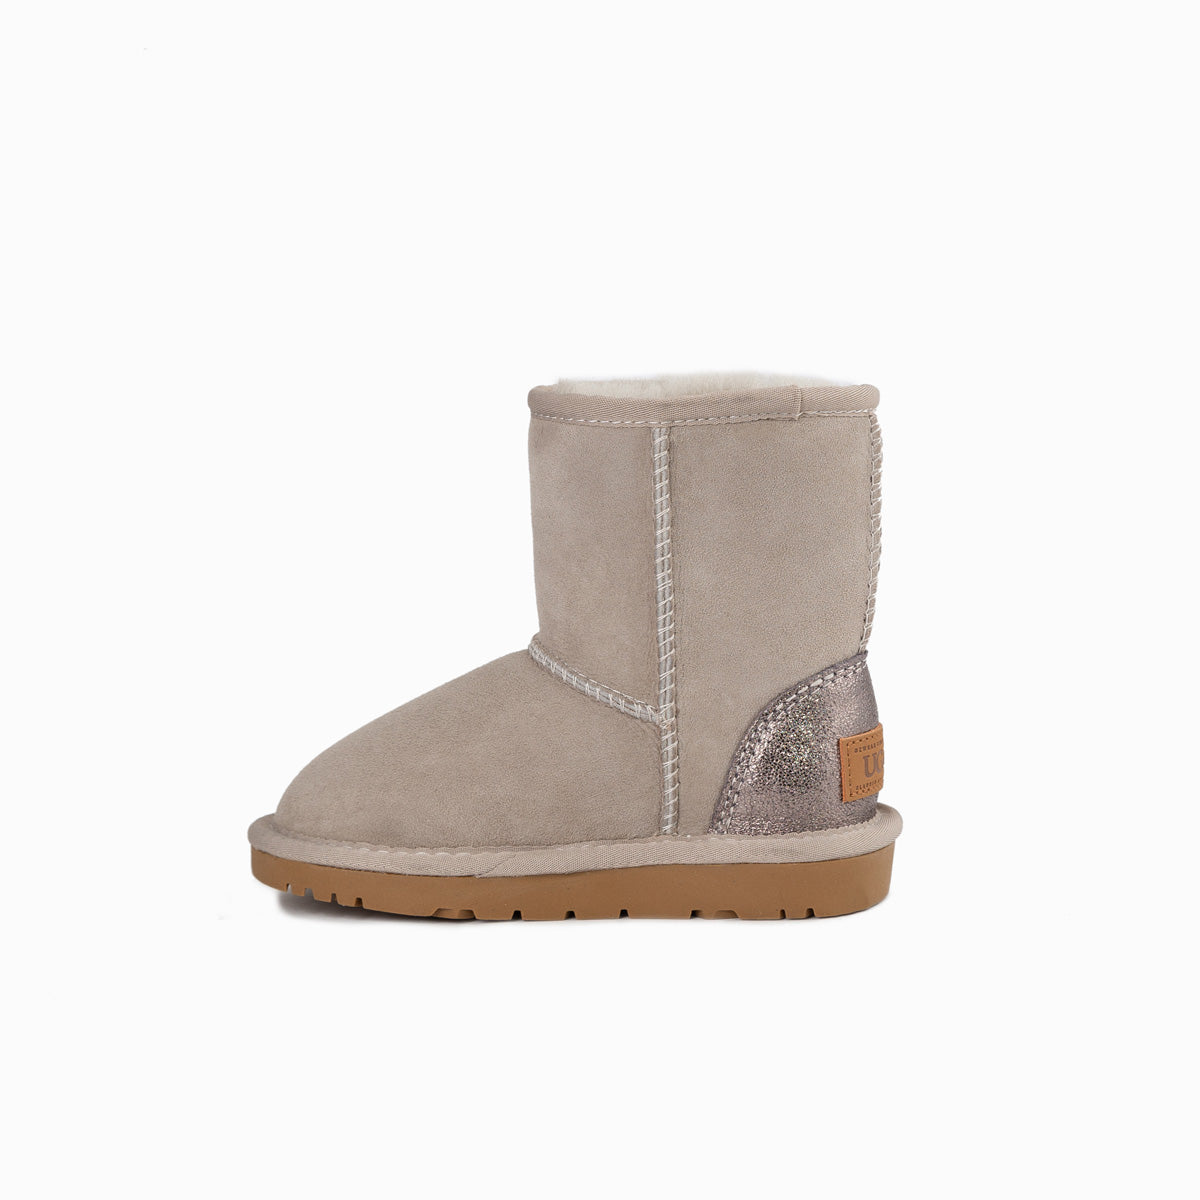 Ugg Kids Classic Long (Glitz) Boots (Water Resistant)